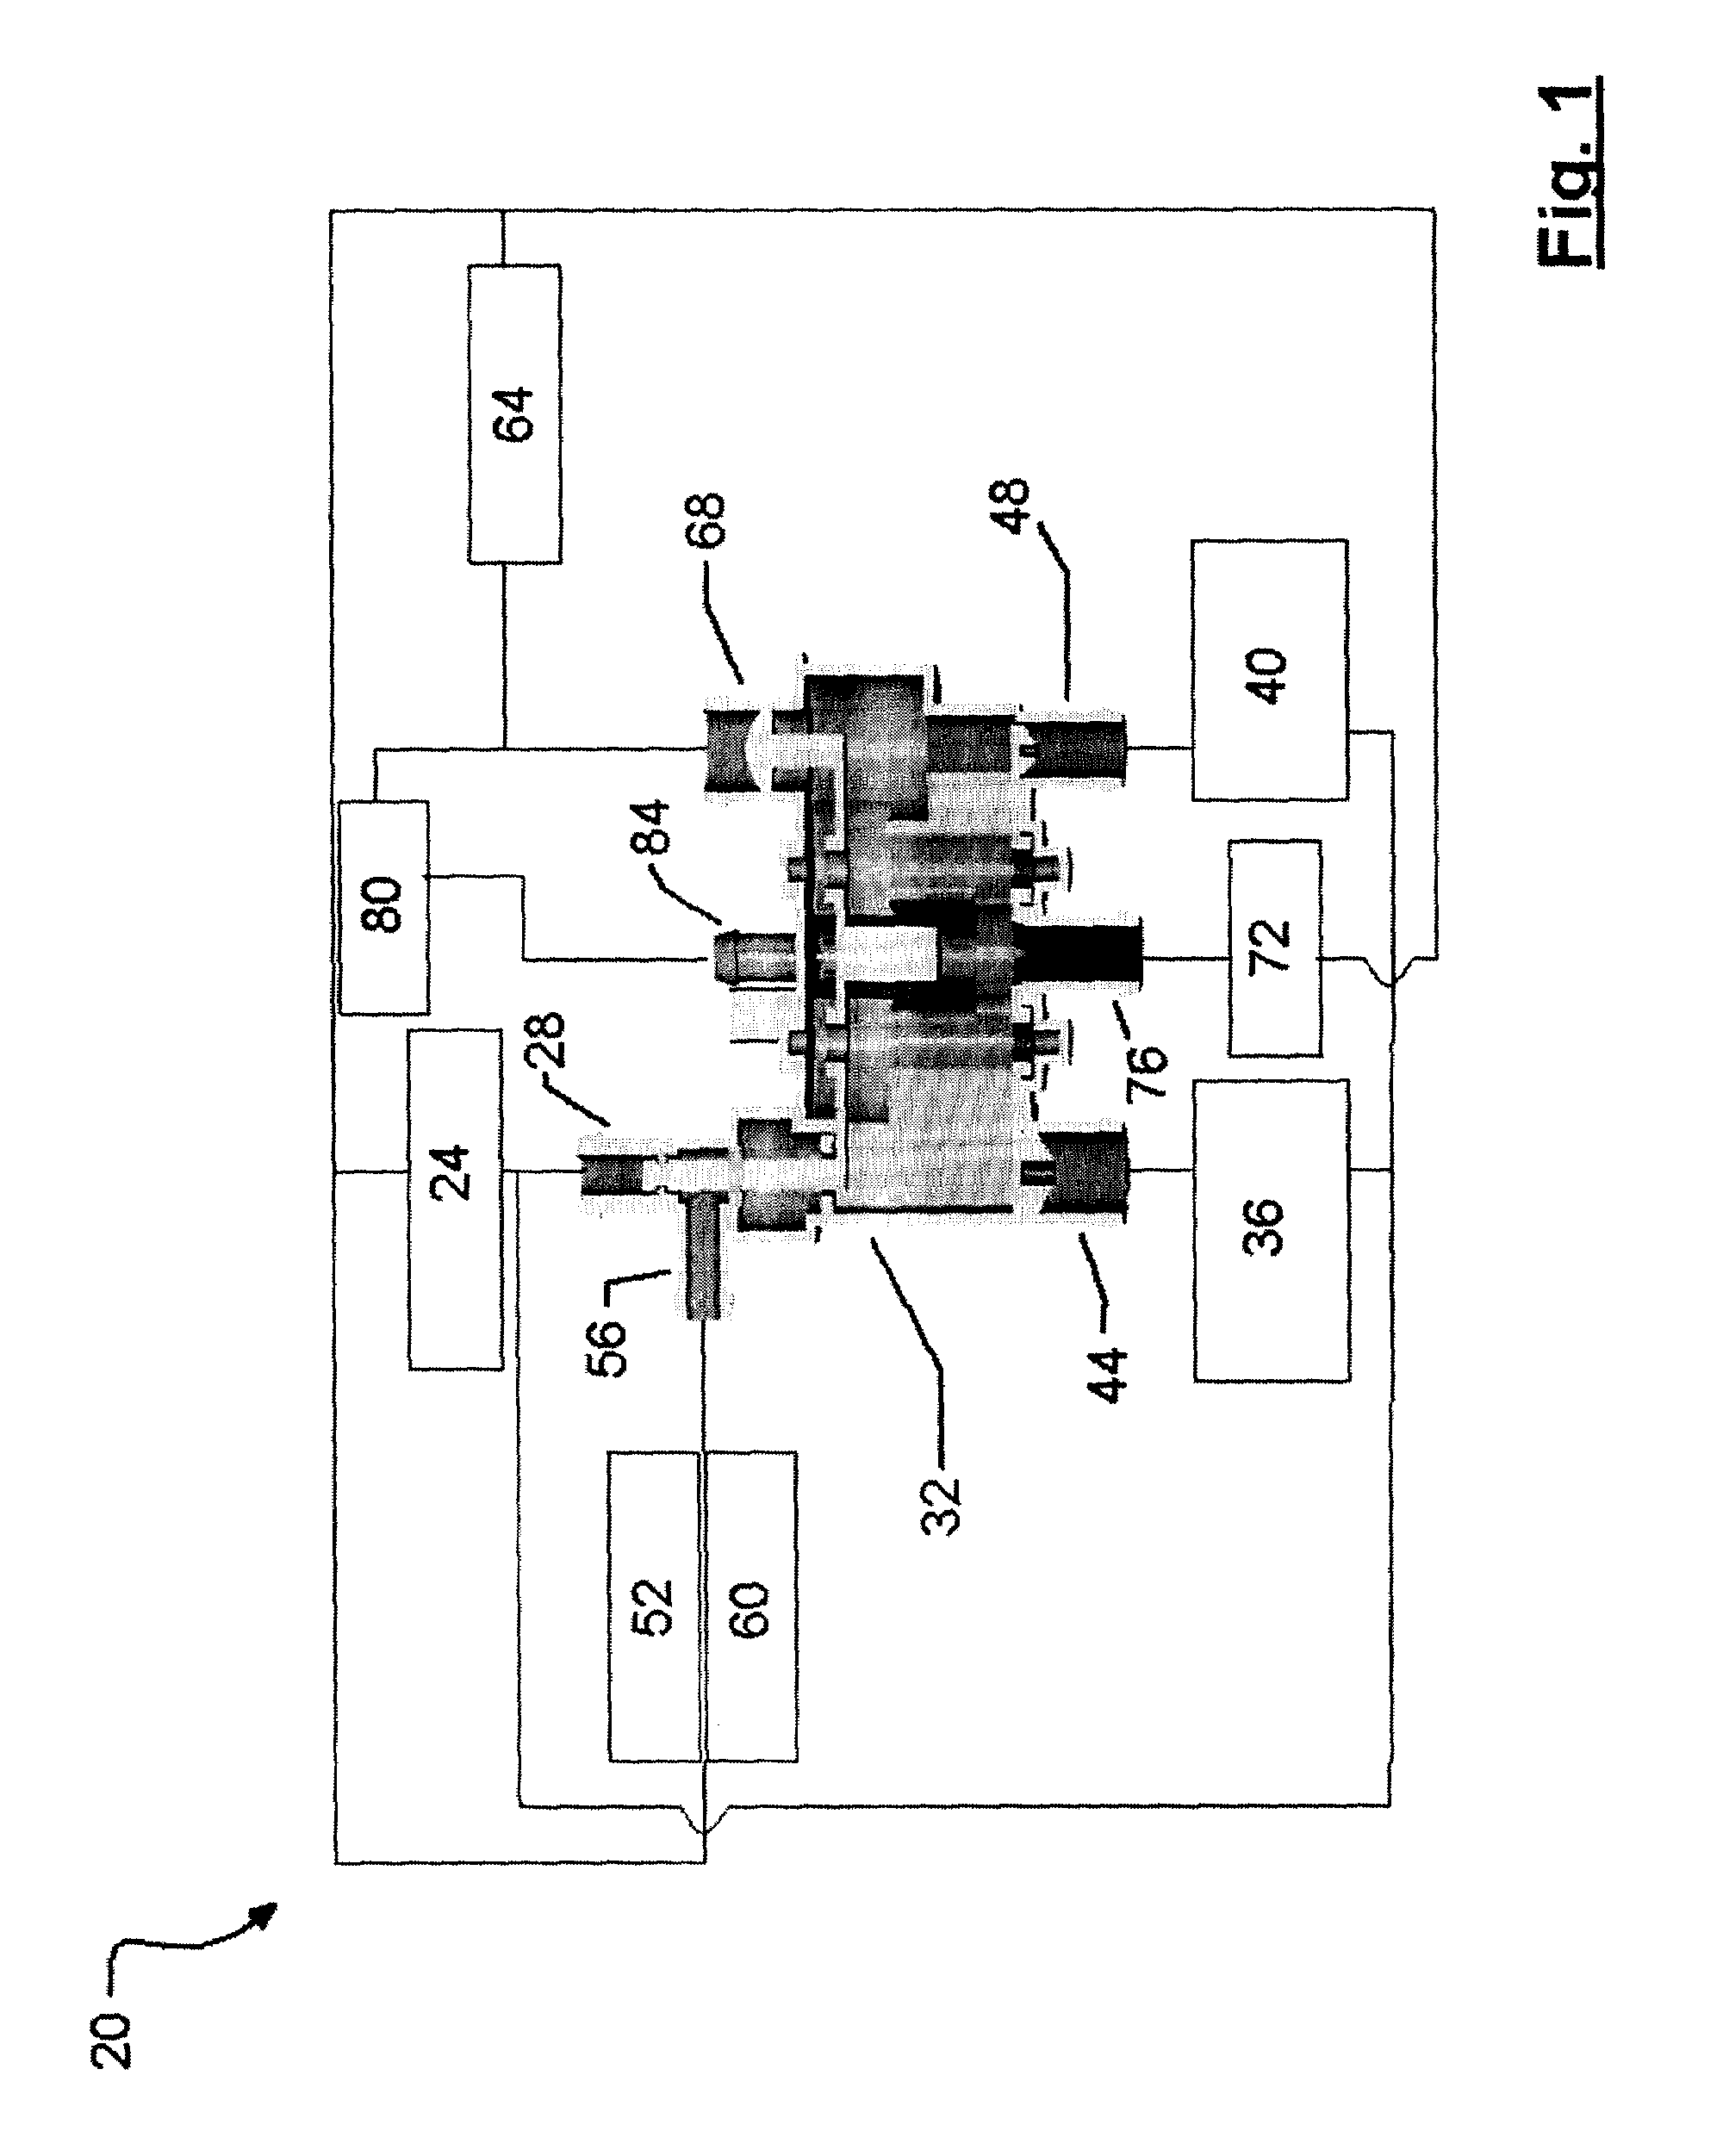 Vehicle Cooling System with Directed Flows